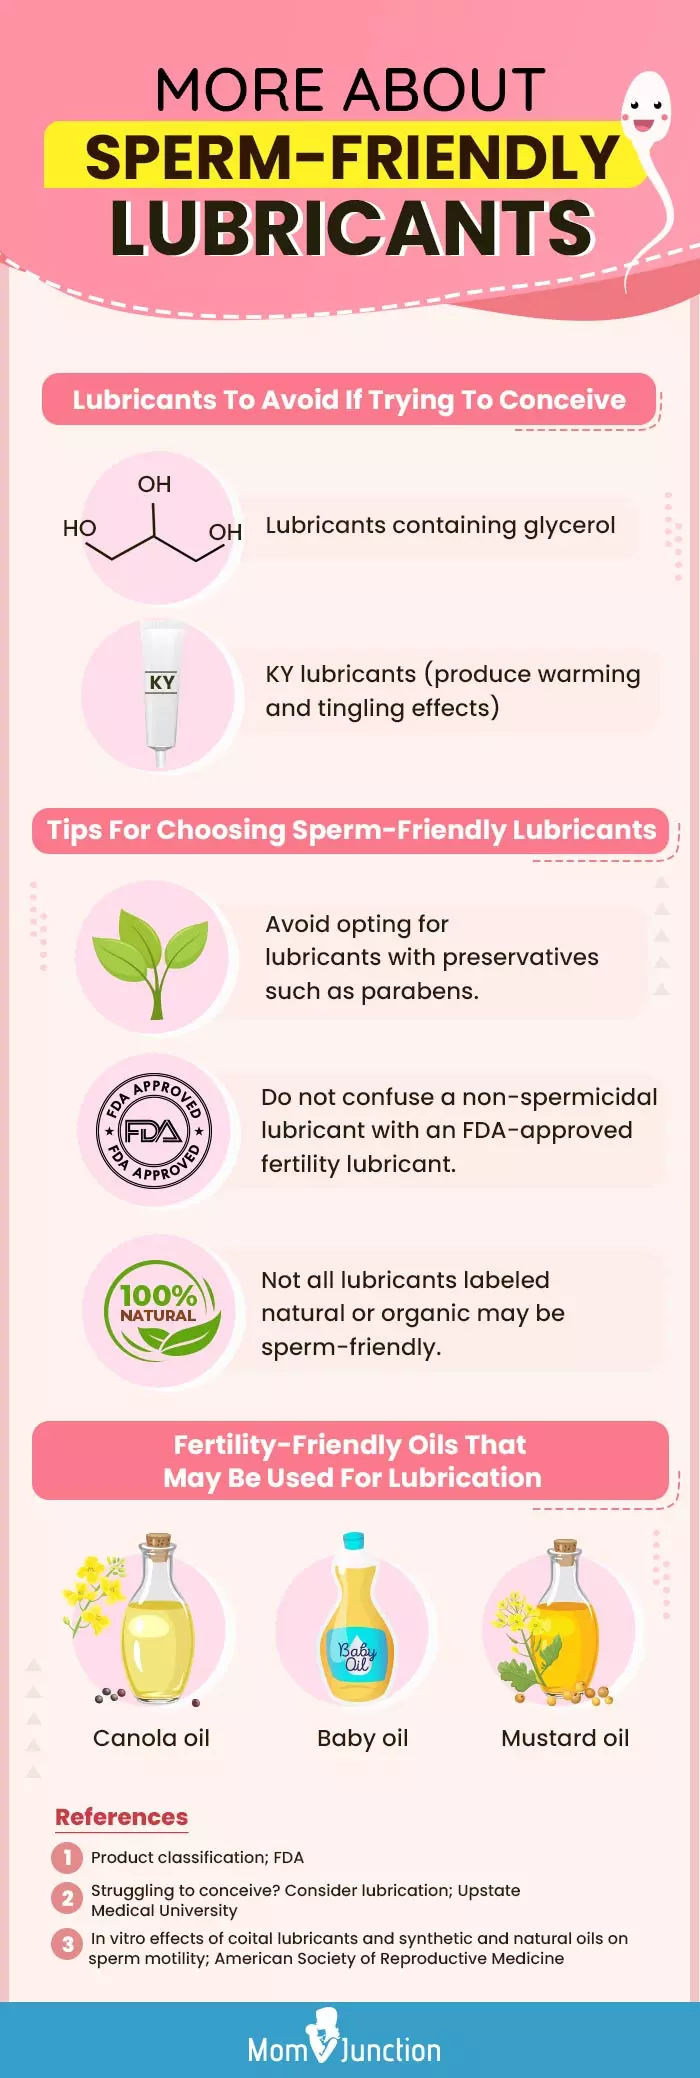 more about sperm friendly lubricants (infographic)